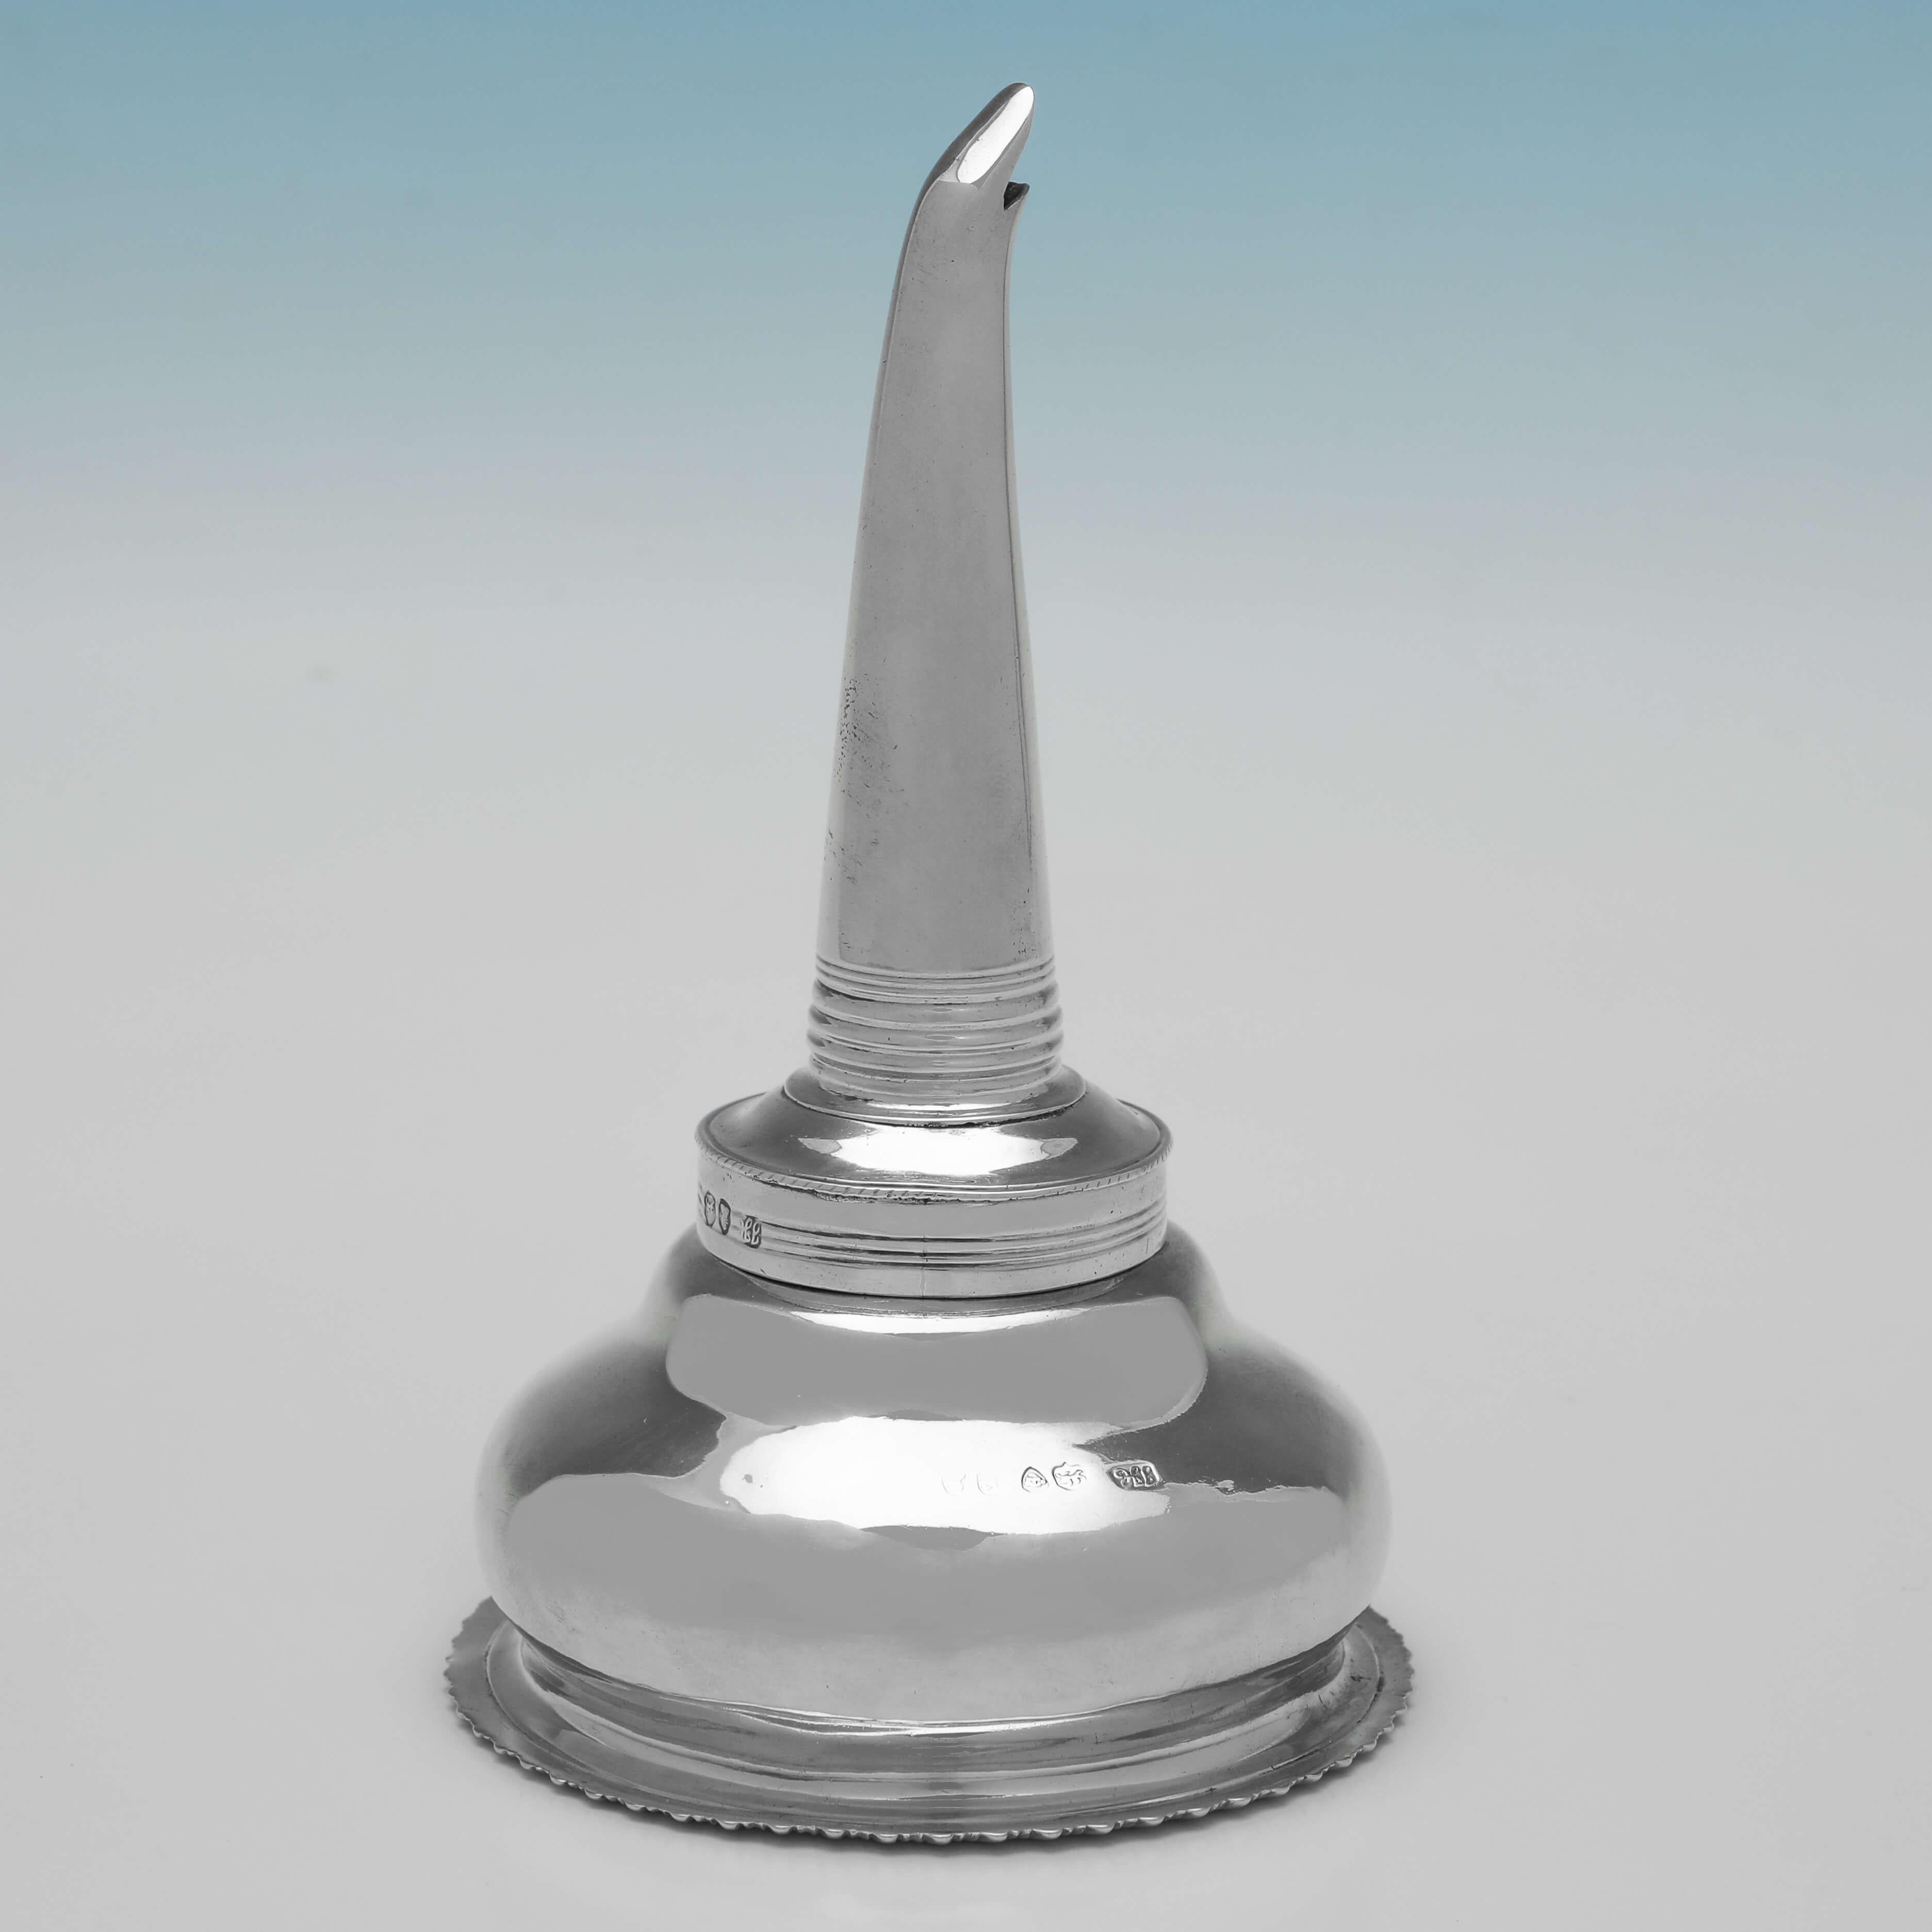 Hallmarked in London in 1832 by Jonathan Hayne, this handsome, William IV Period, Antique Sterling Silver Wine Funnel, is of traditional form, with a gadroon border, a shell thumb piece, and a removable muslin ring. 

The wine funnel measures